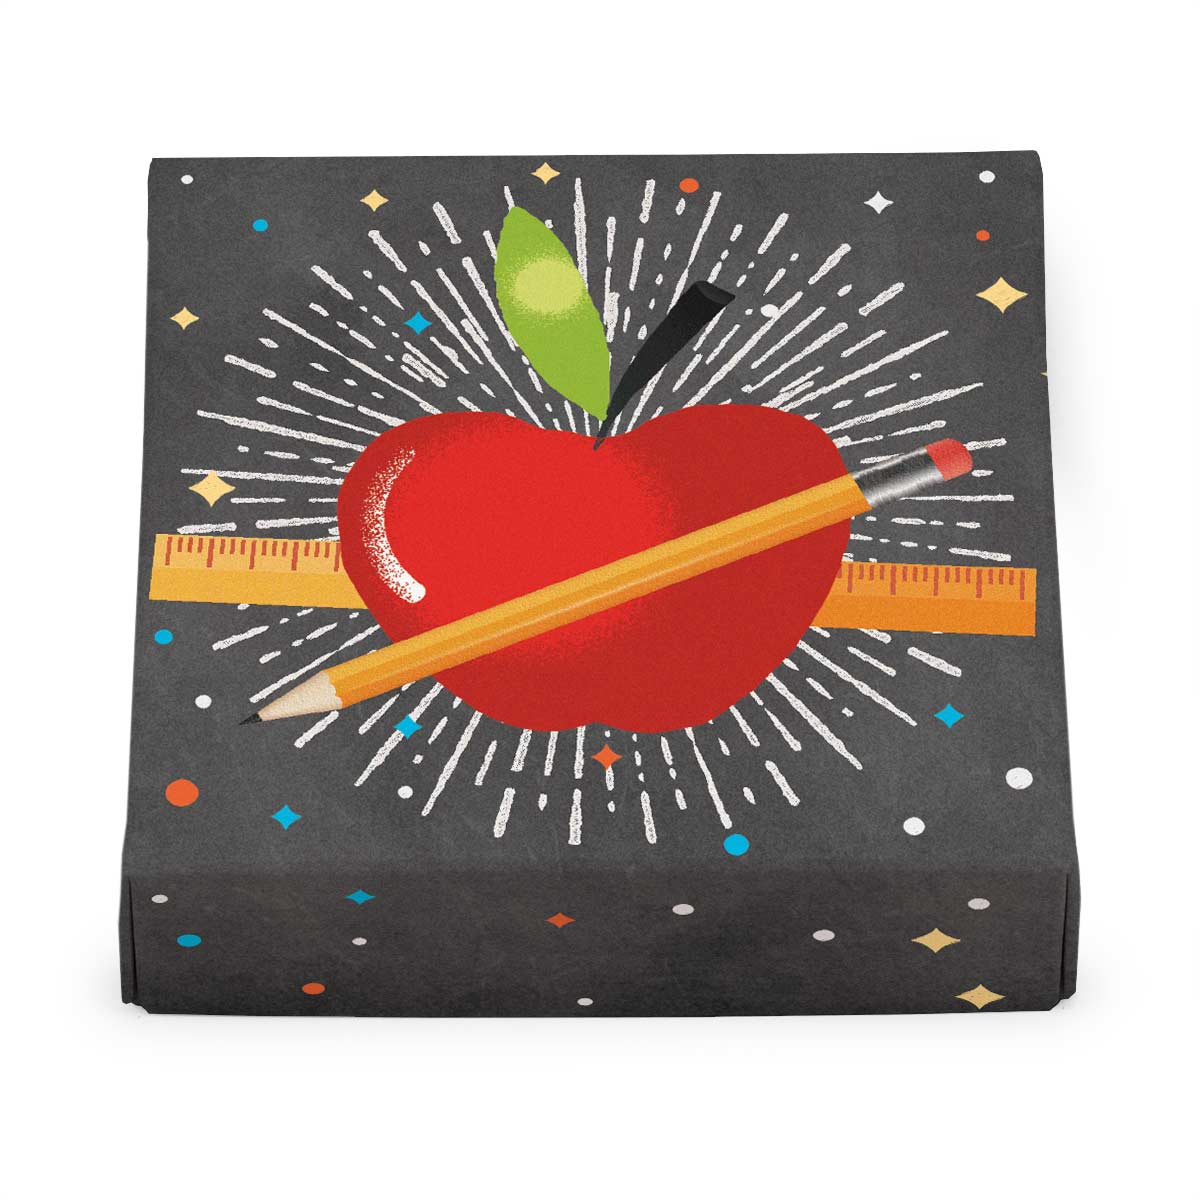 Back to School Themed Box Cover for 9 Piece Holiday Assortment